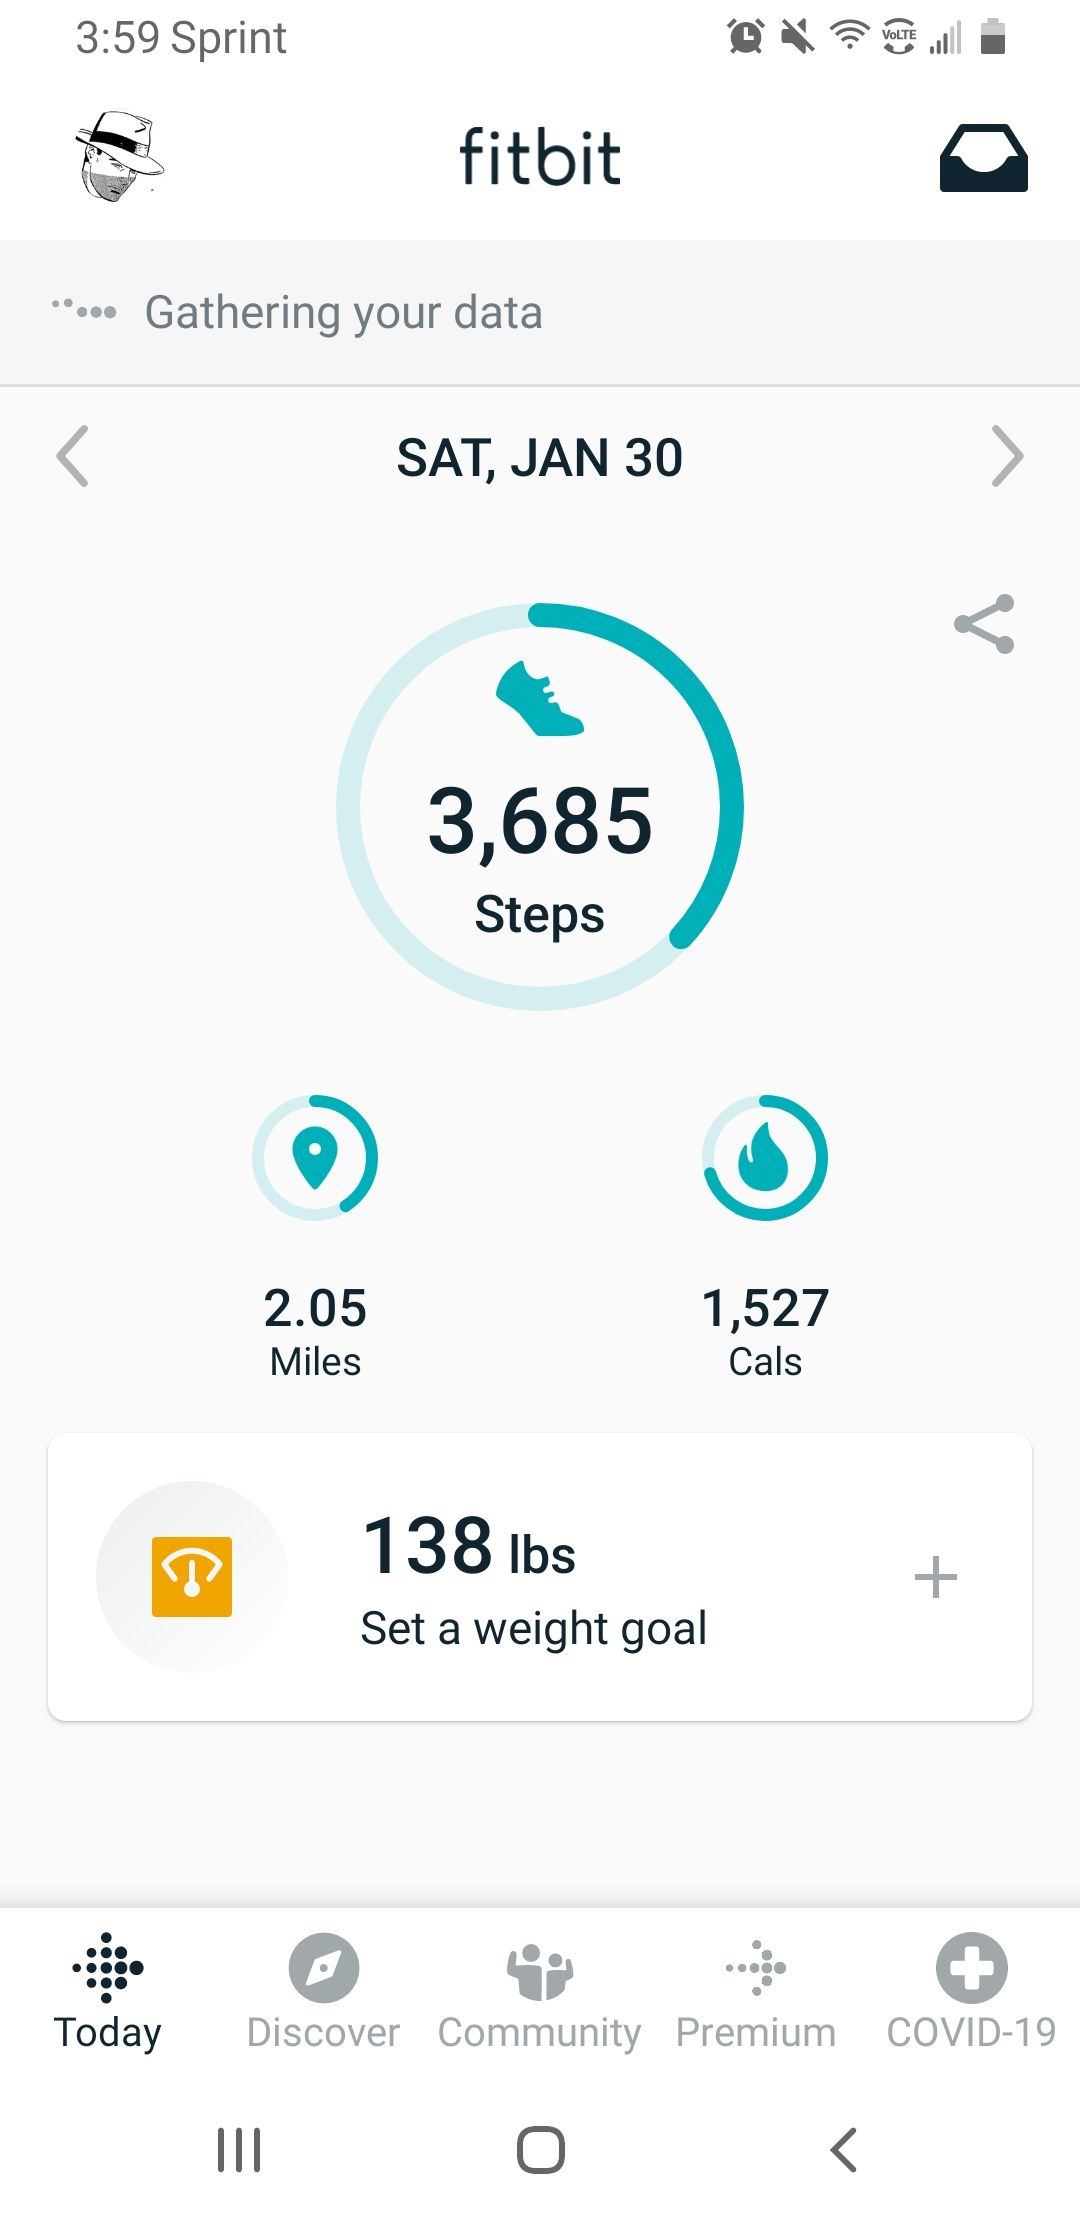 fitbit stopped counting steps